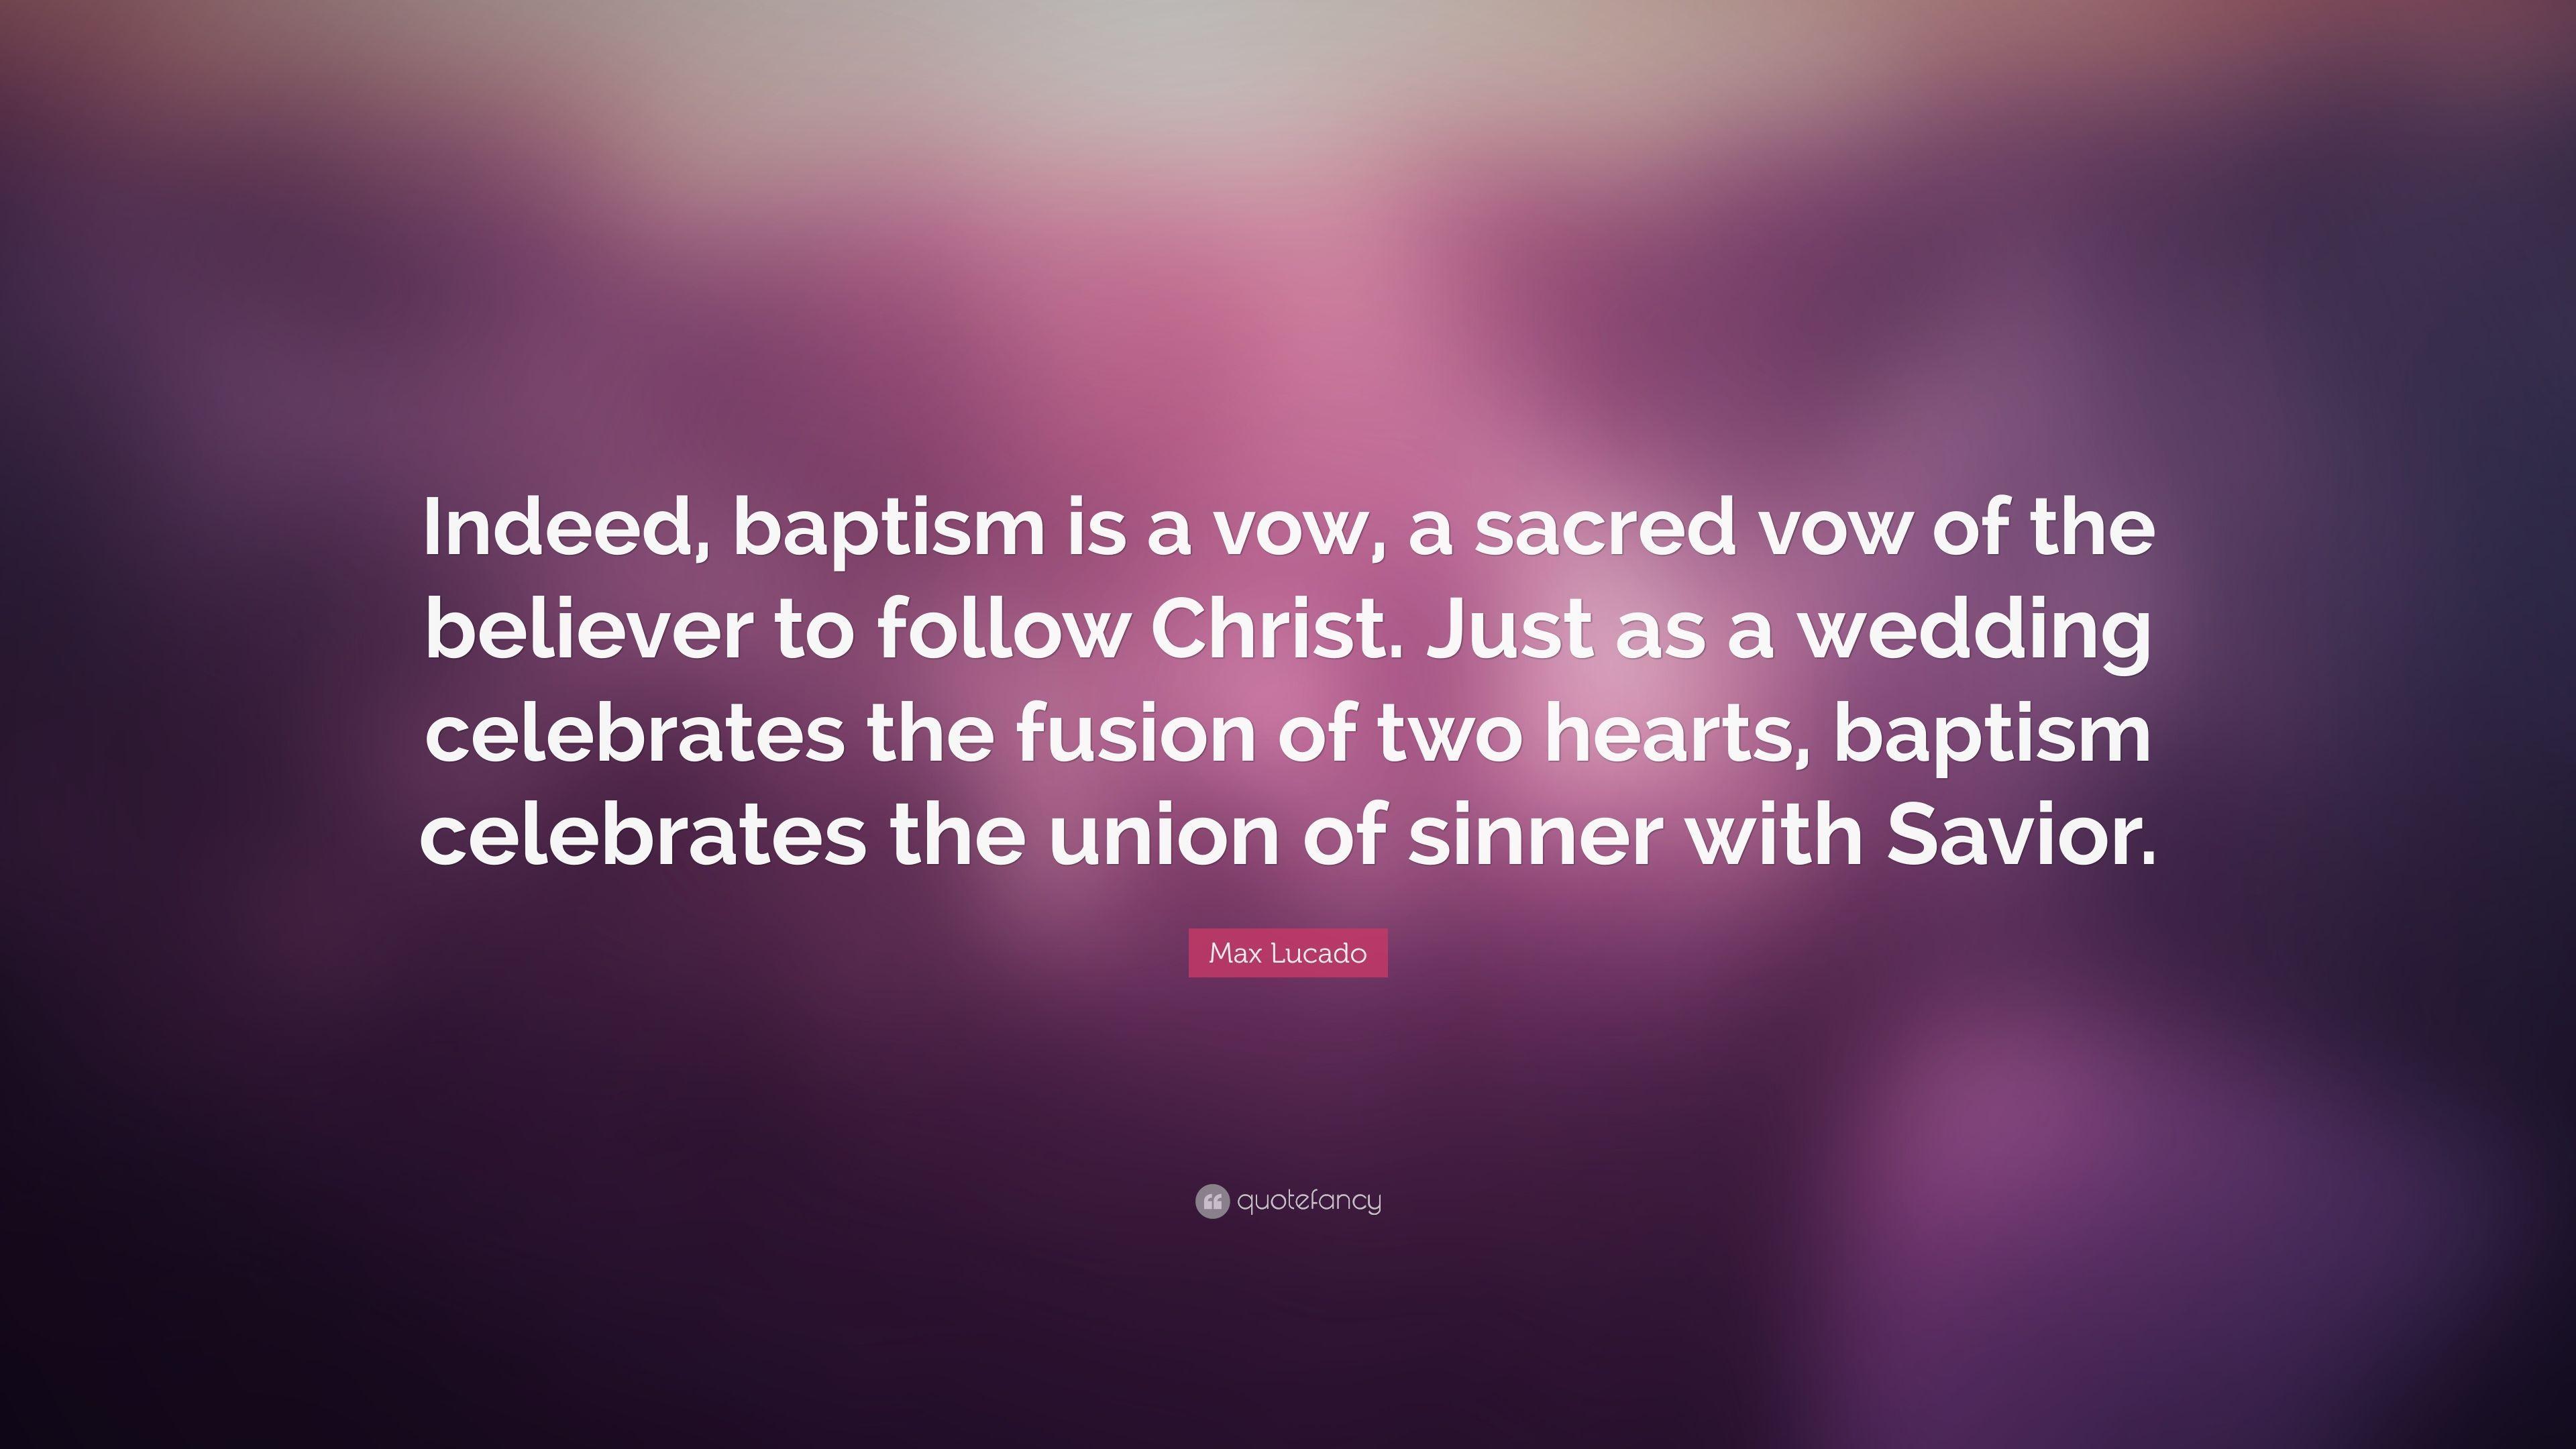 Max Lucado Quote: “Indeed, baptism is a vow, a sacred vow